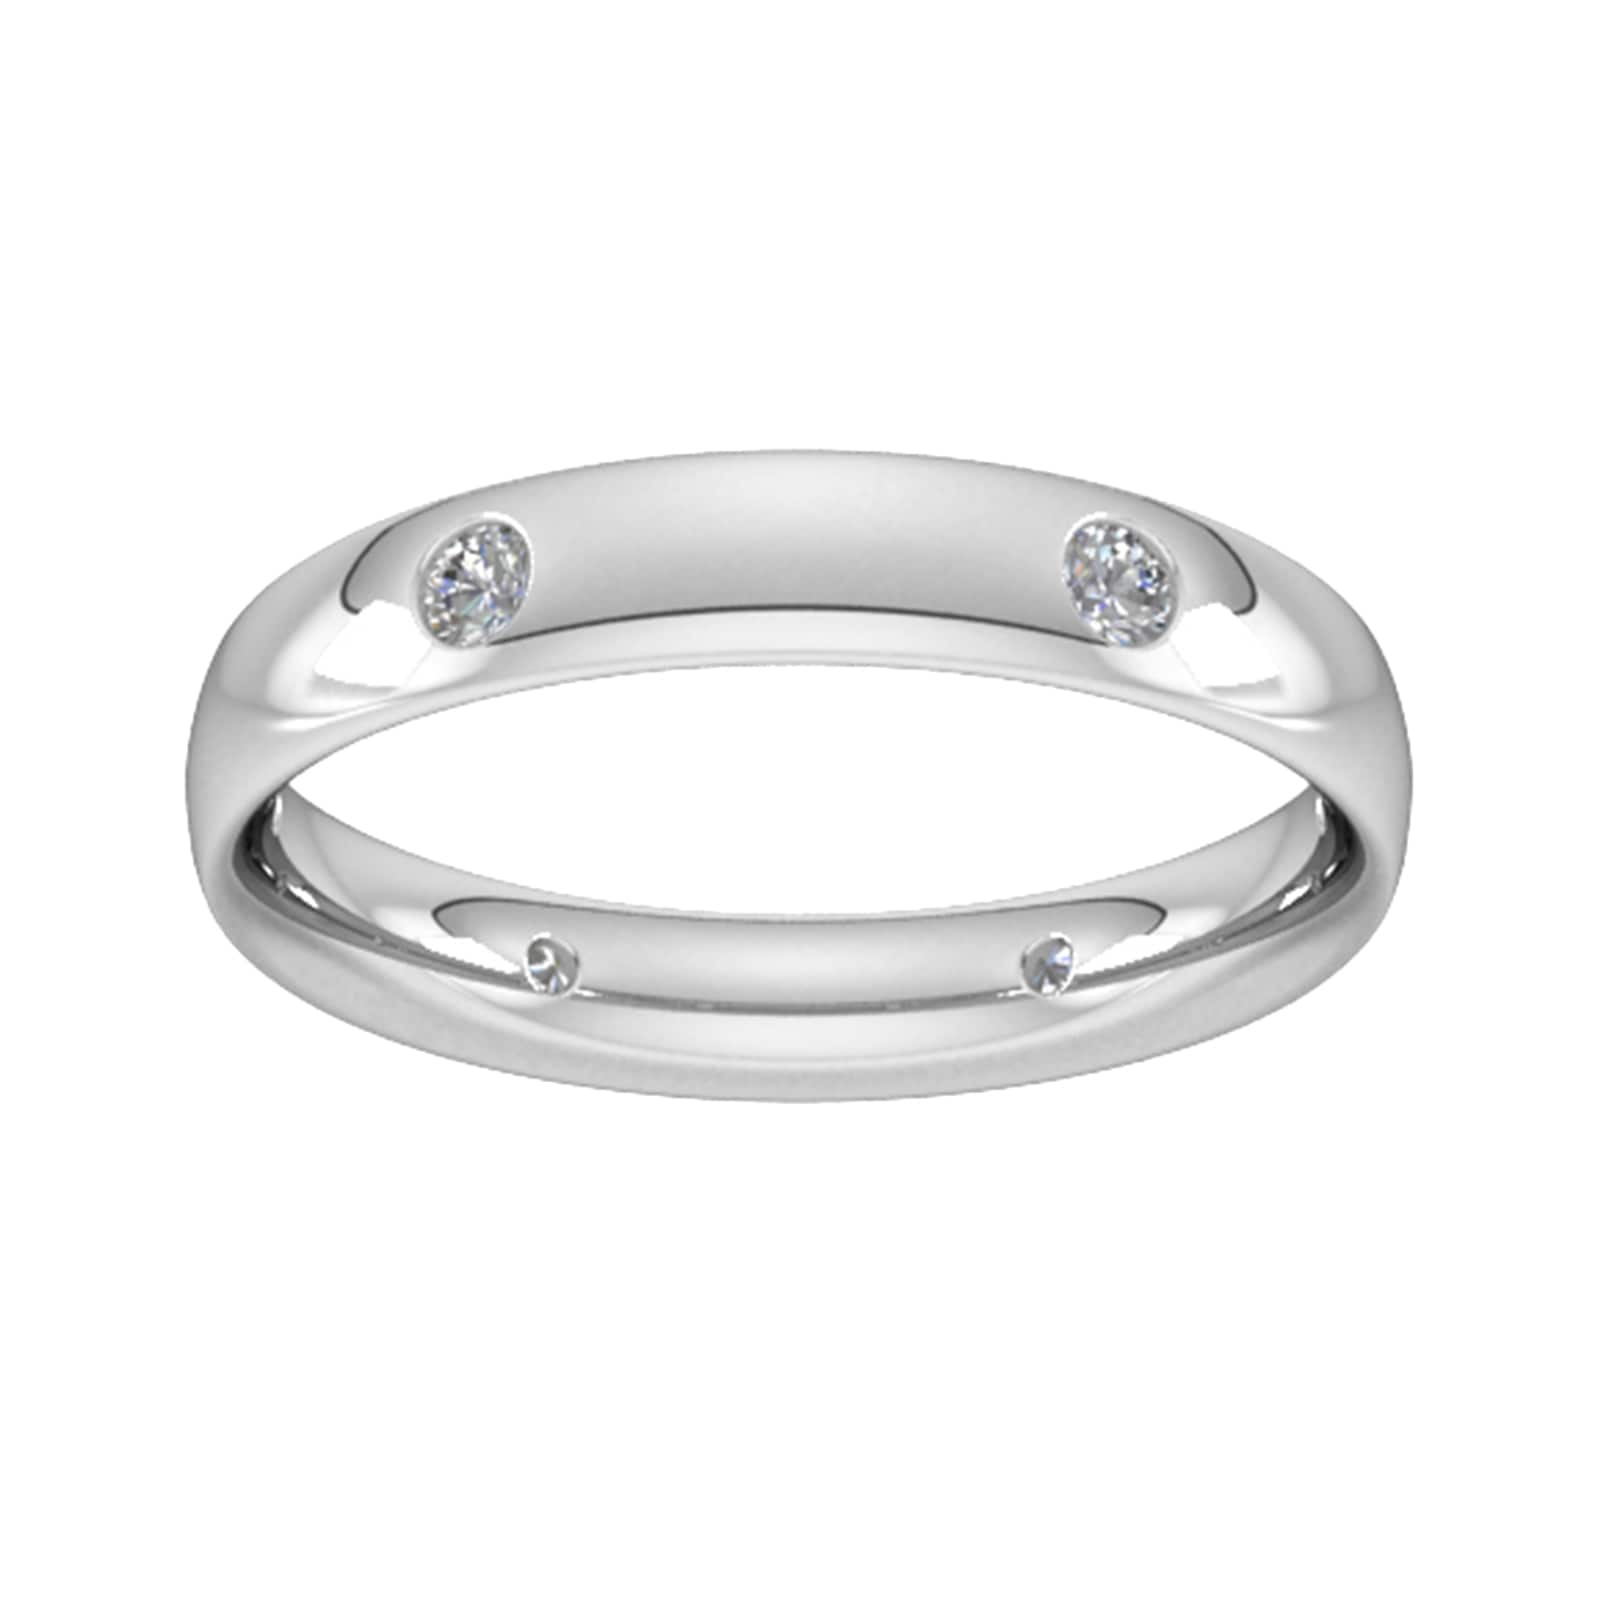 0.21 Carat Total Weight 6 Stone Brilliant Cut Rub Over Diamond Set Wedding Ring In 9 Carat White Gold - Ring Size L